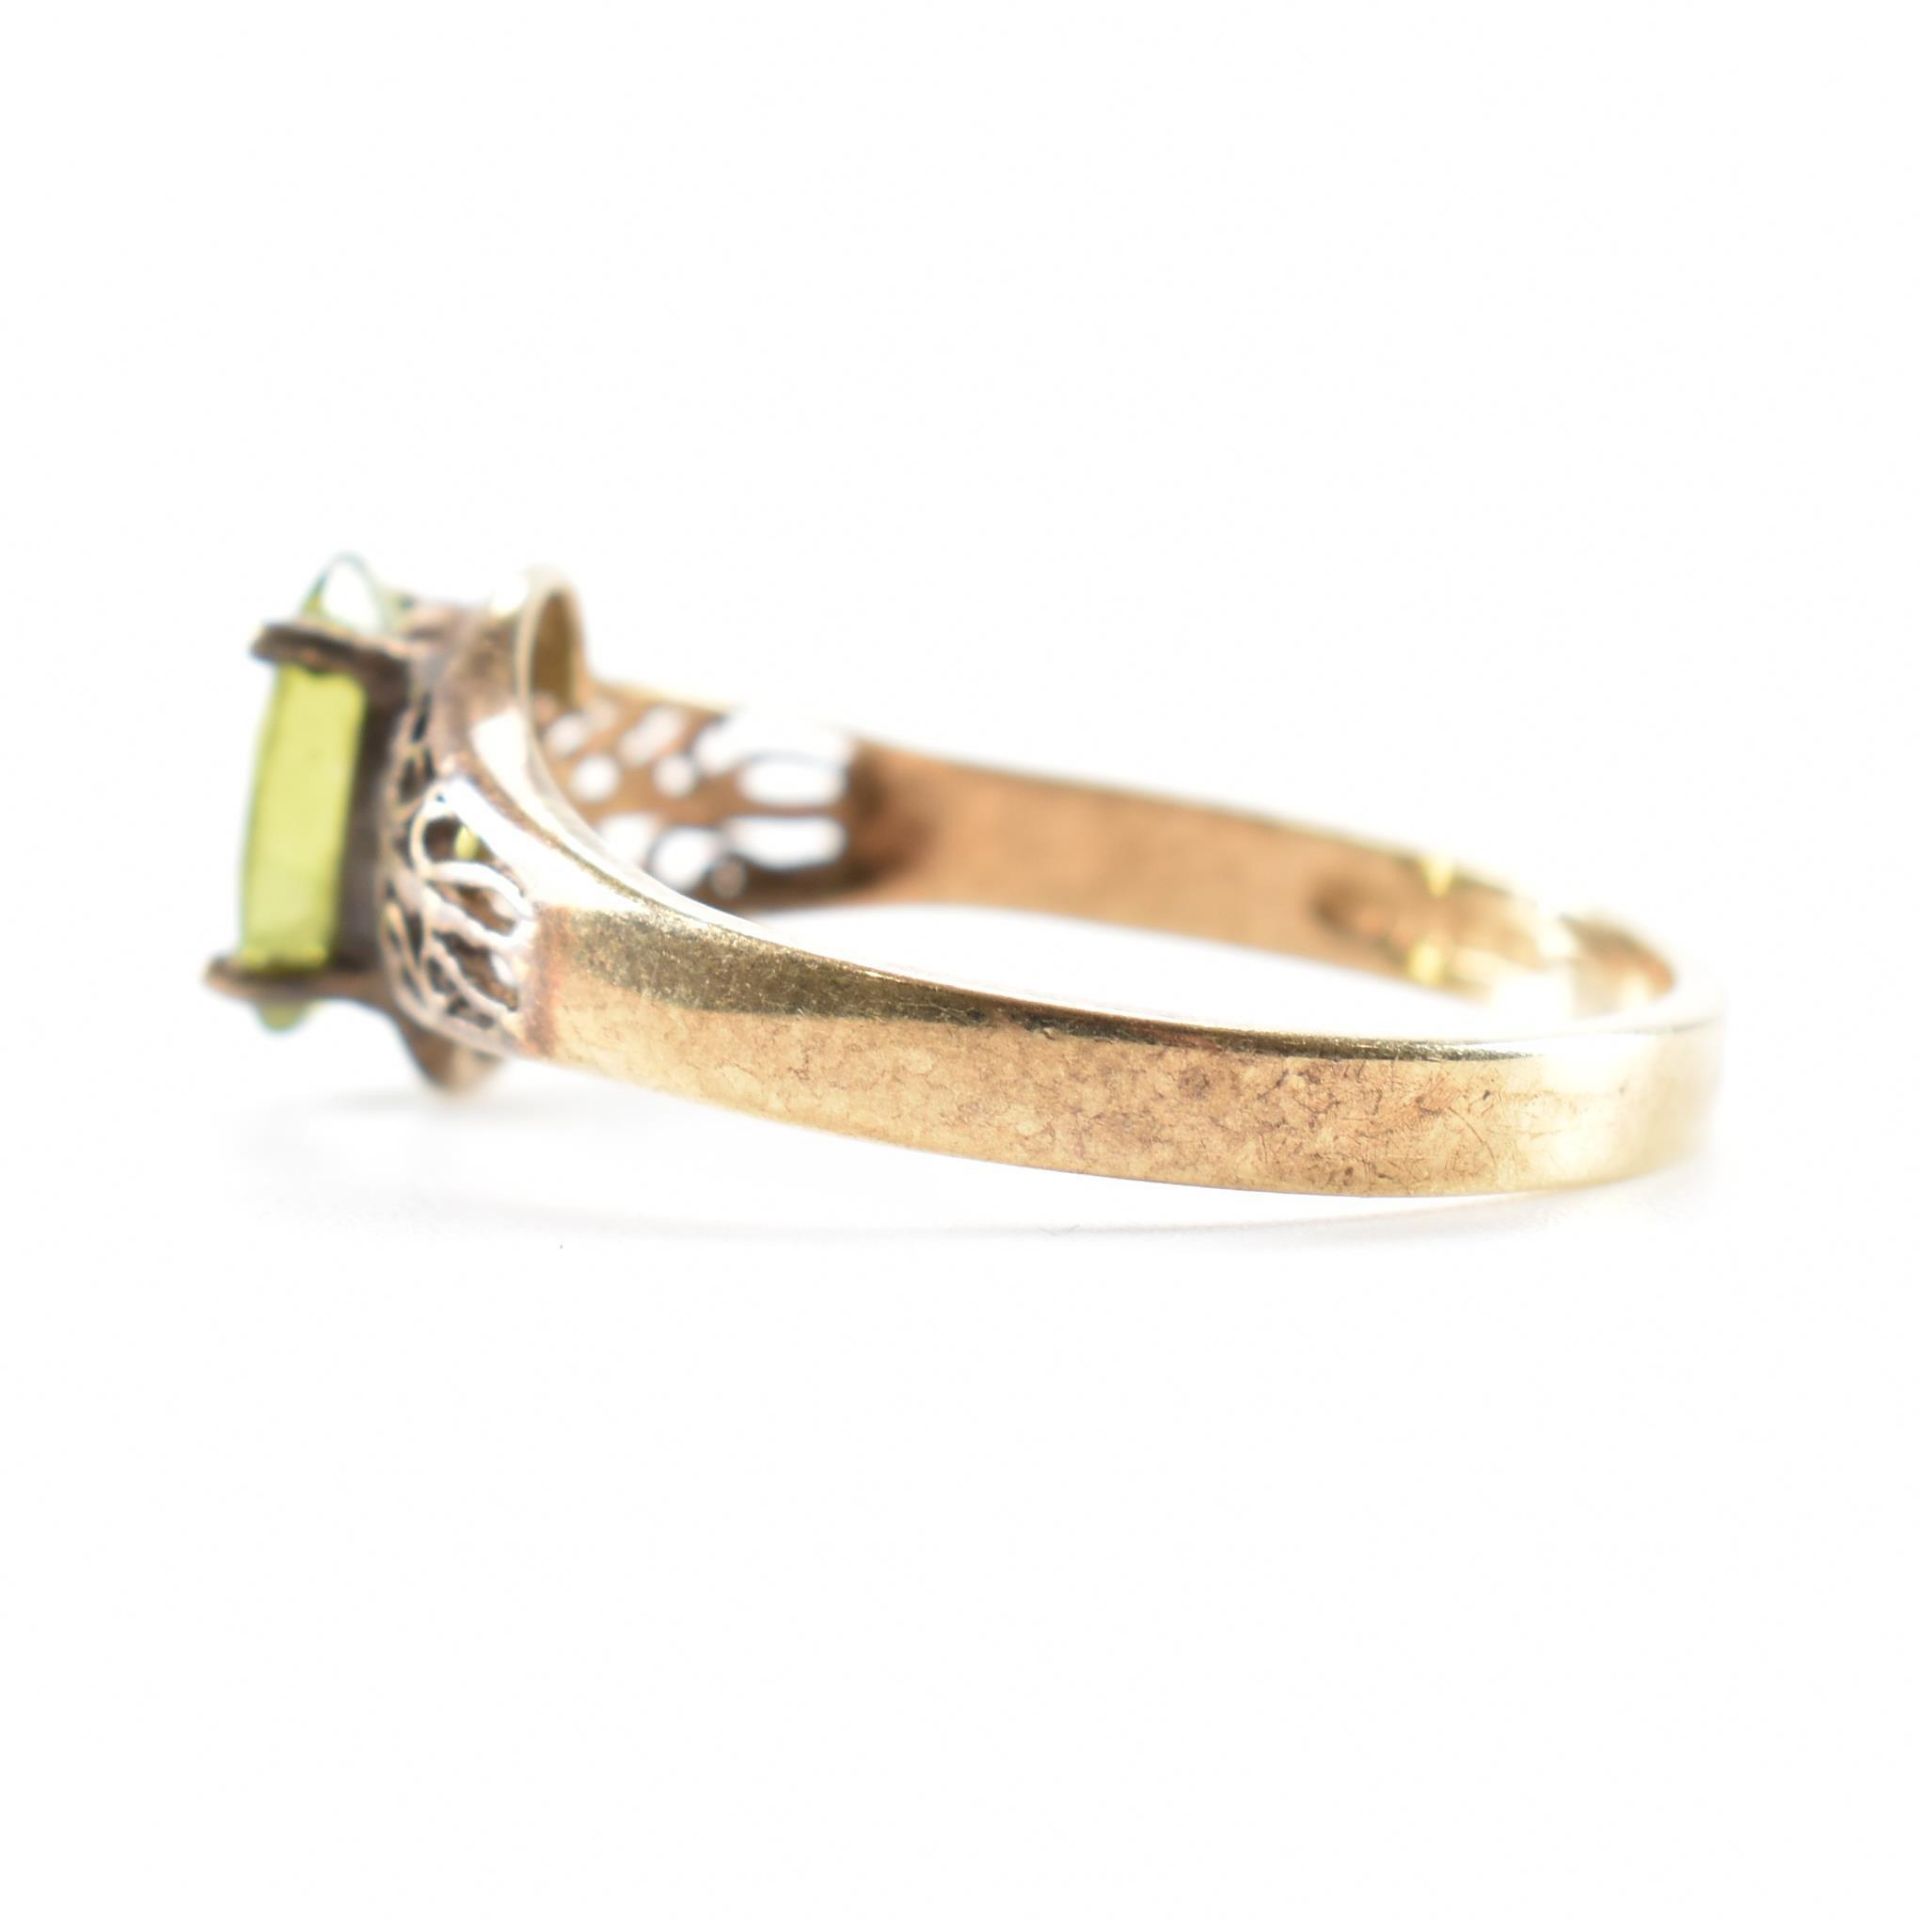 HALLMARKED 9CT GOLD & PERIDOT SOLITAIRE RING - Image 2 of 8